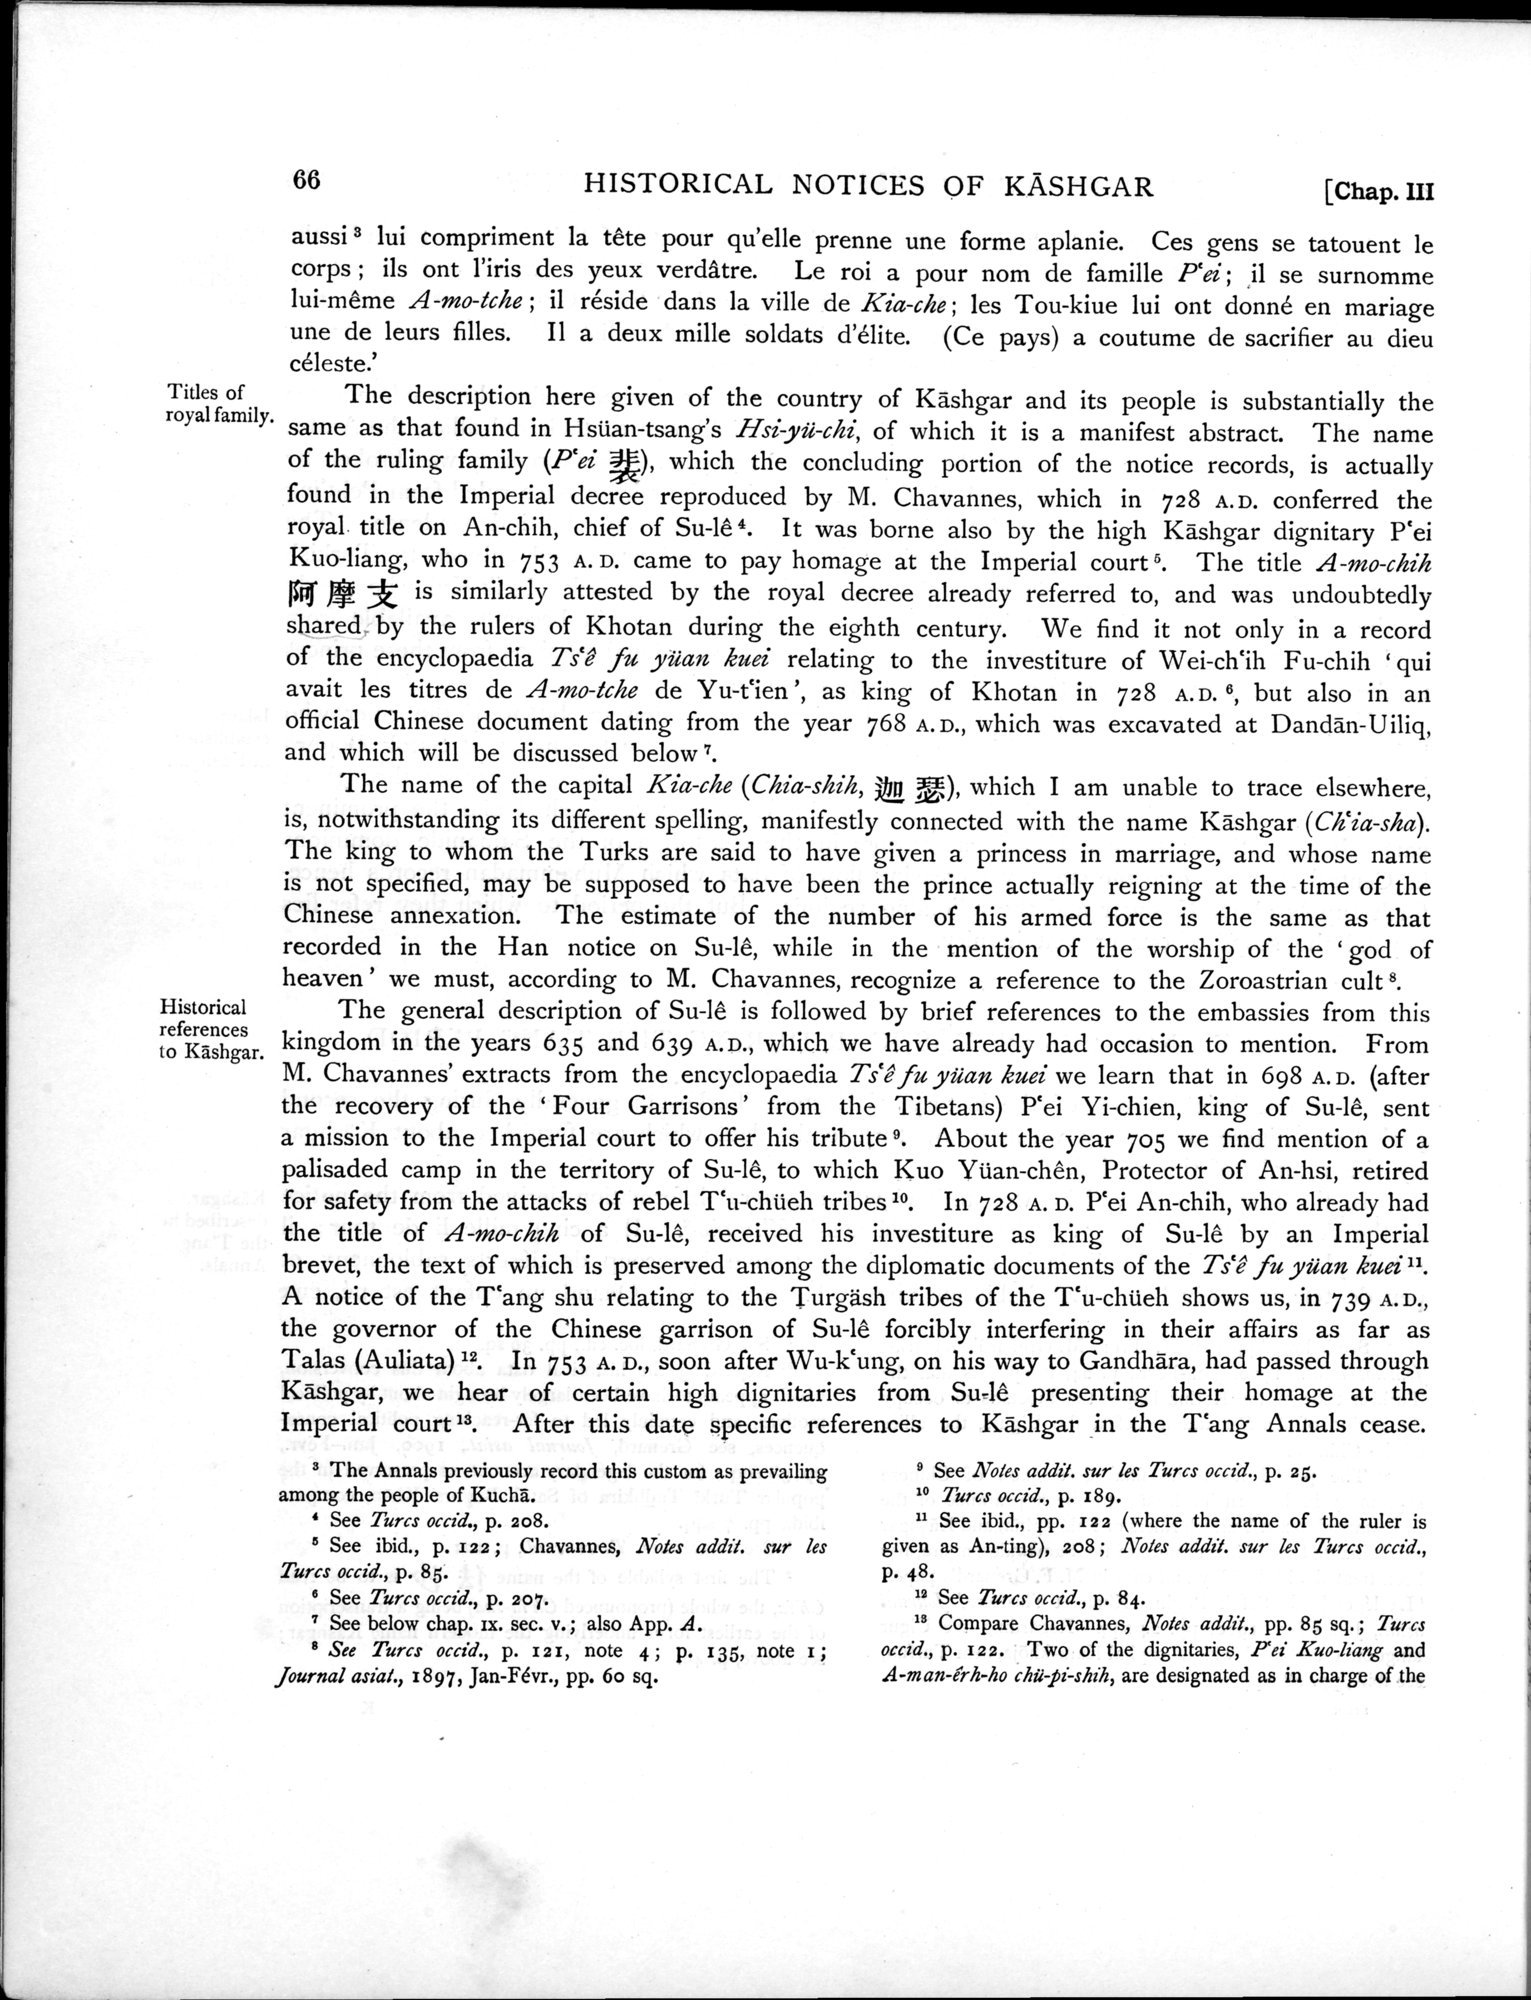 Ancient Khotan : vol.1 / Page 106 (Grayscale High Resolution Image)